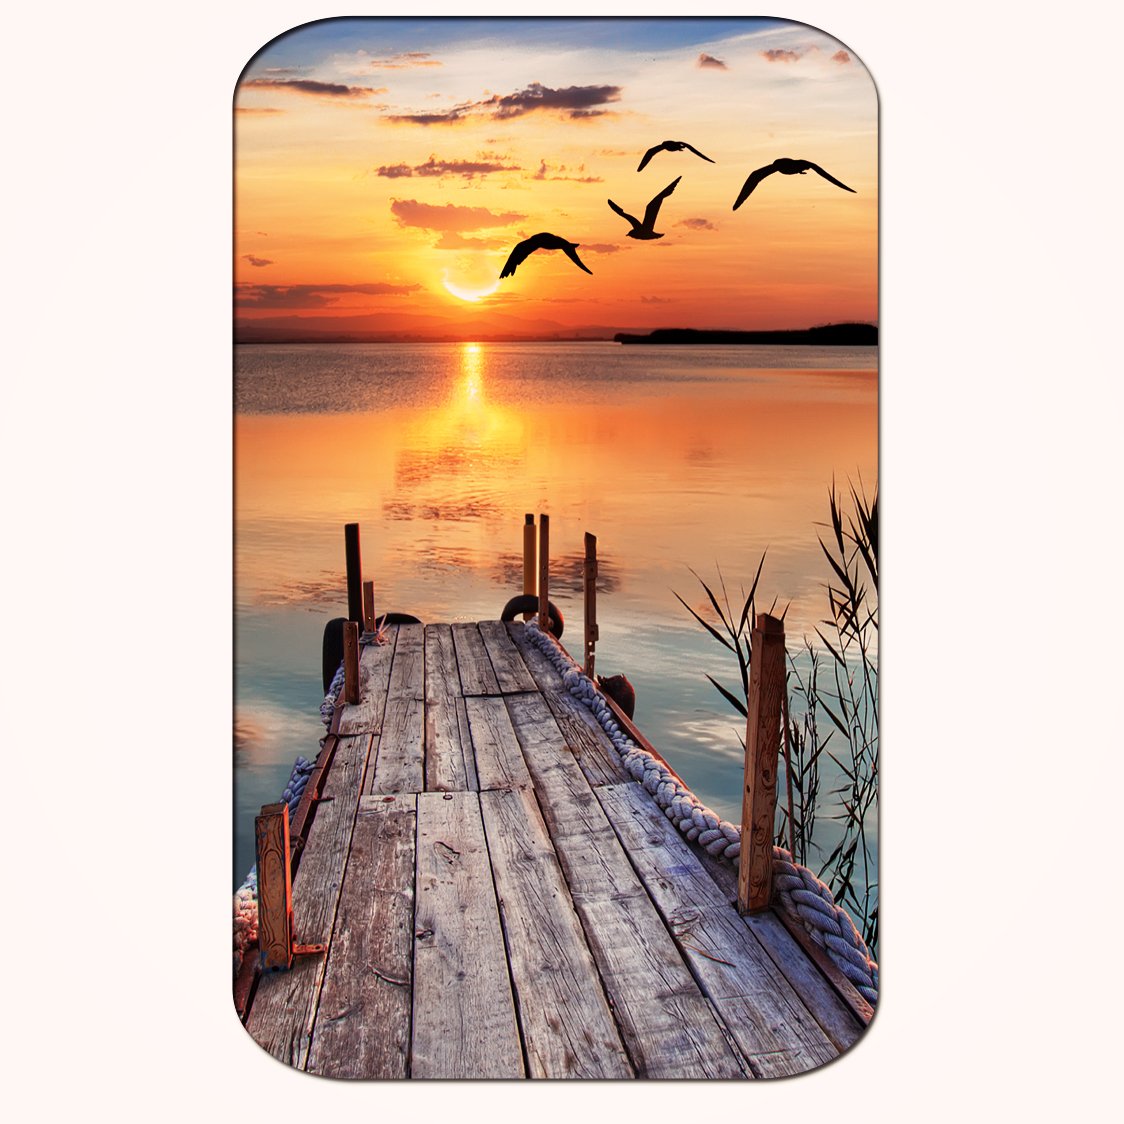 Casperme beautiful Sunset seen Big Frame Wall Painting For Living Room & Office (18 x 36 inches)